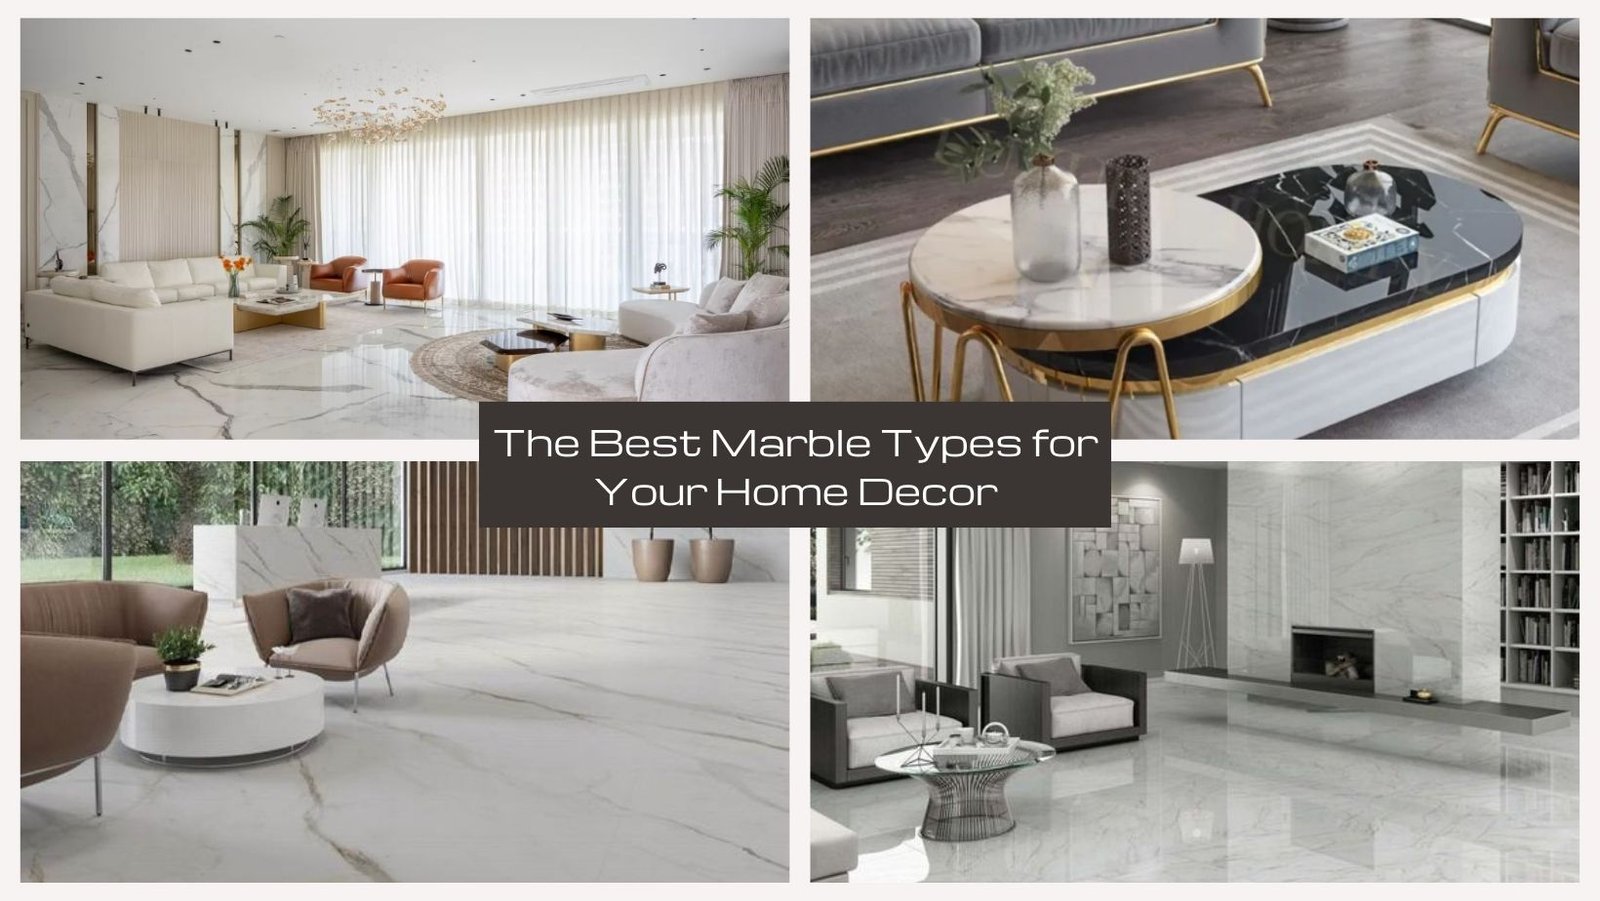 The Best Marble Types for Your Home Decor